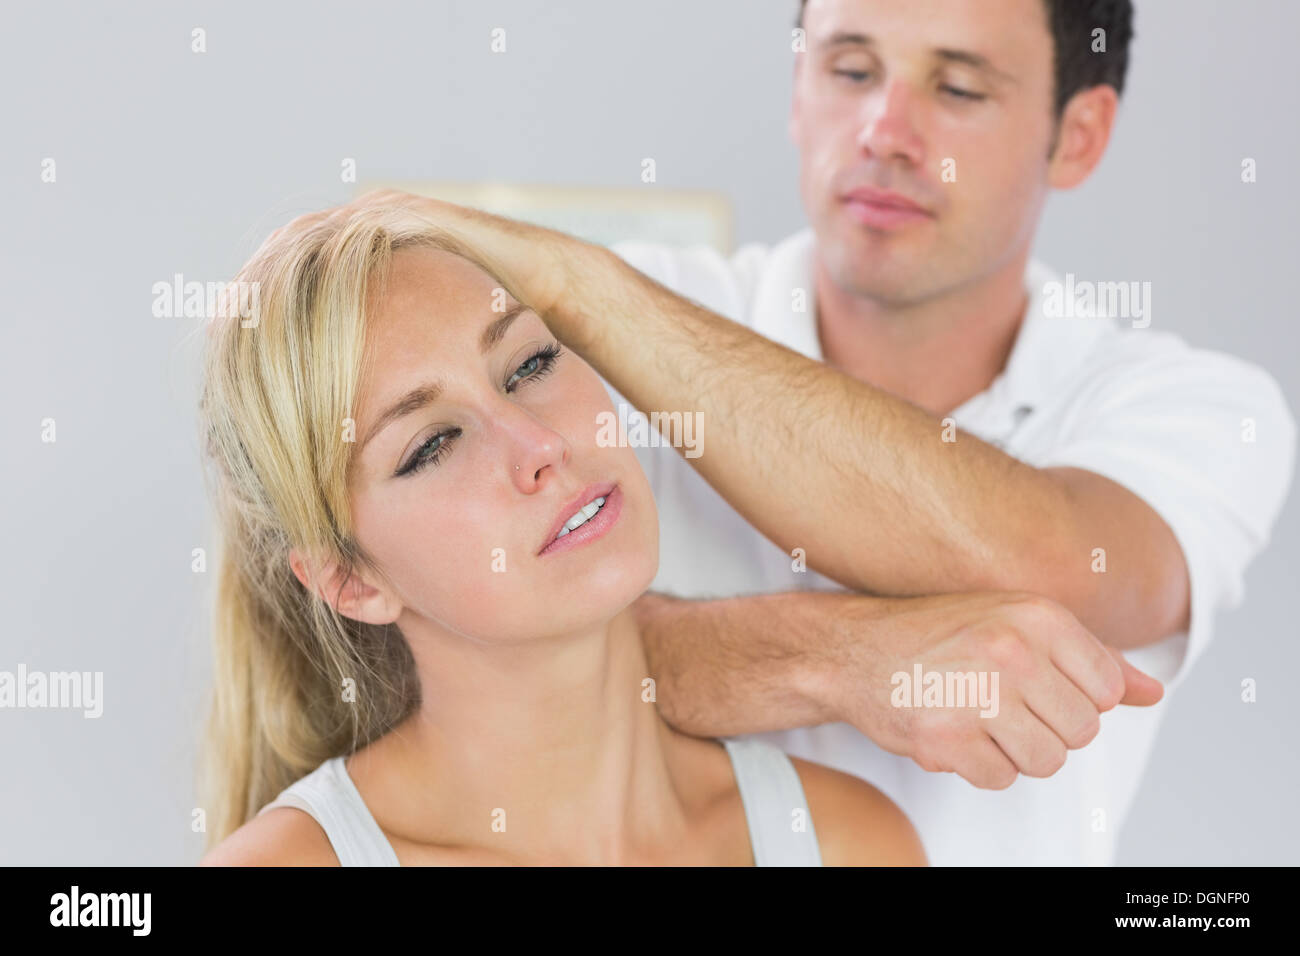 Good looking physiotherapist massaging patients neck with elbow Stock Photo